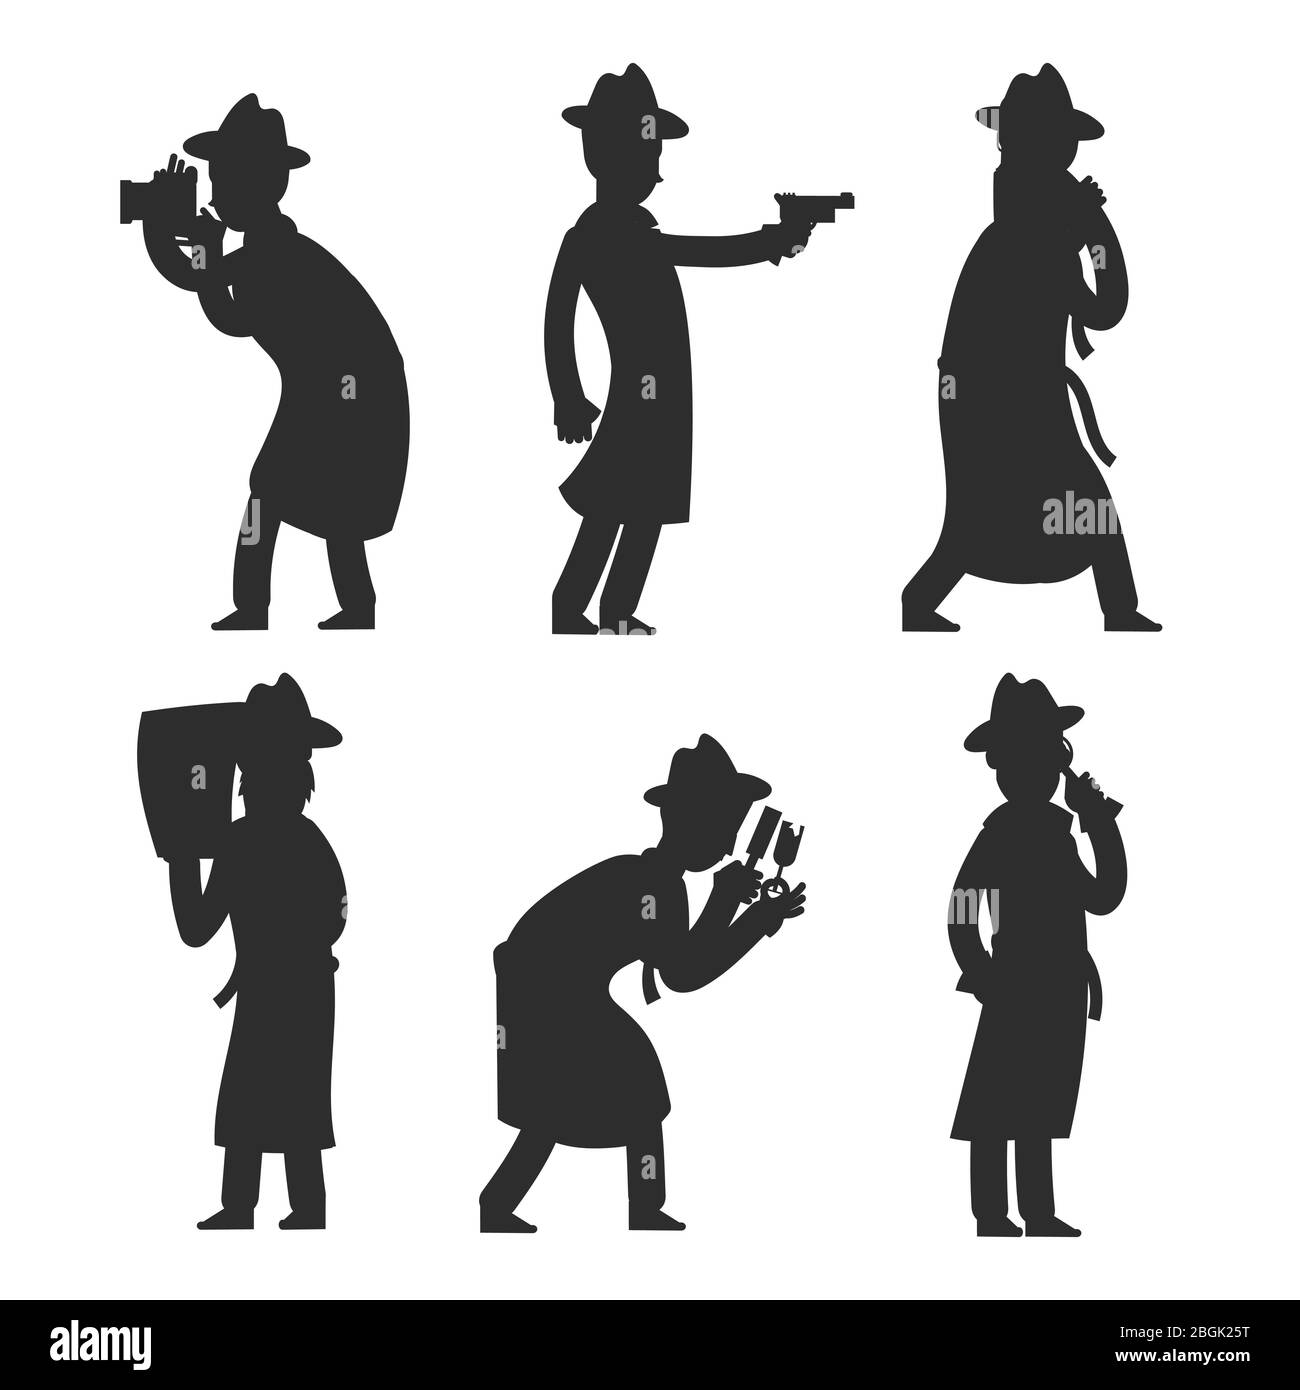 Detective silhouettes isolated on white. Policeman silhouettes vector illustration. Detective police investigator, private inspector Stock Vector